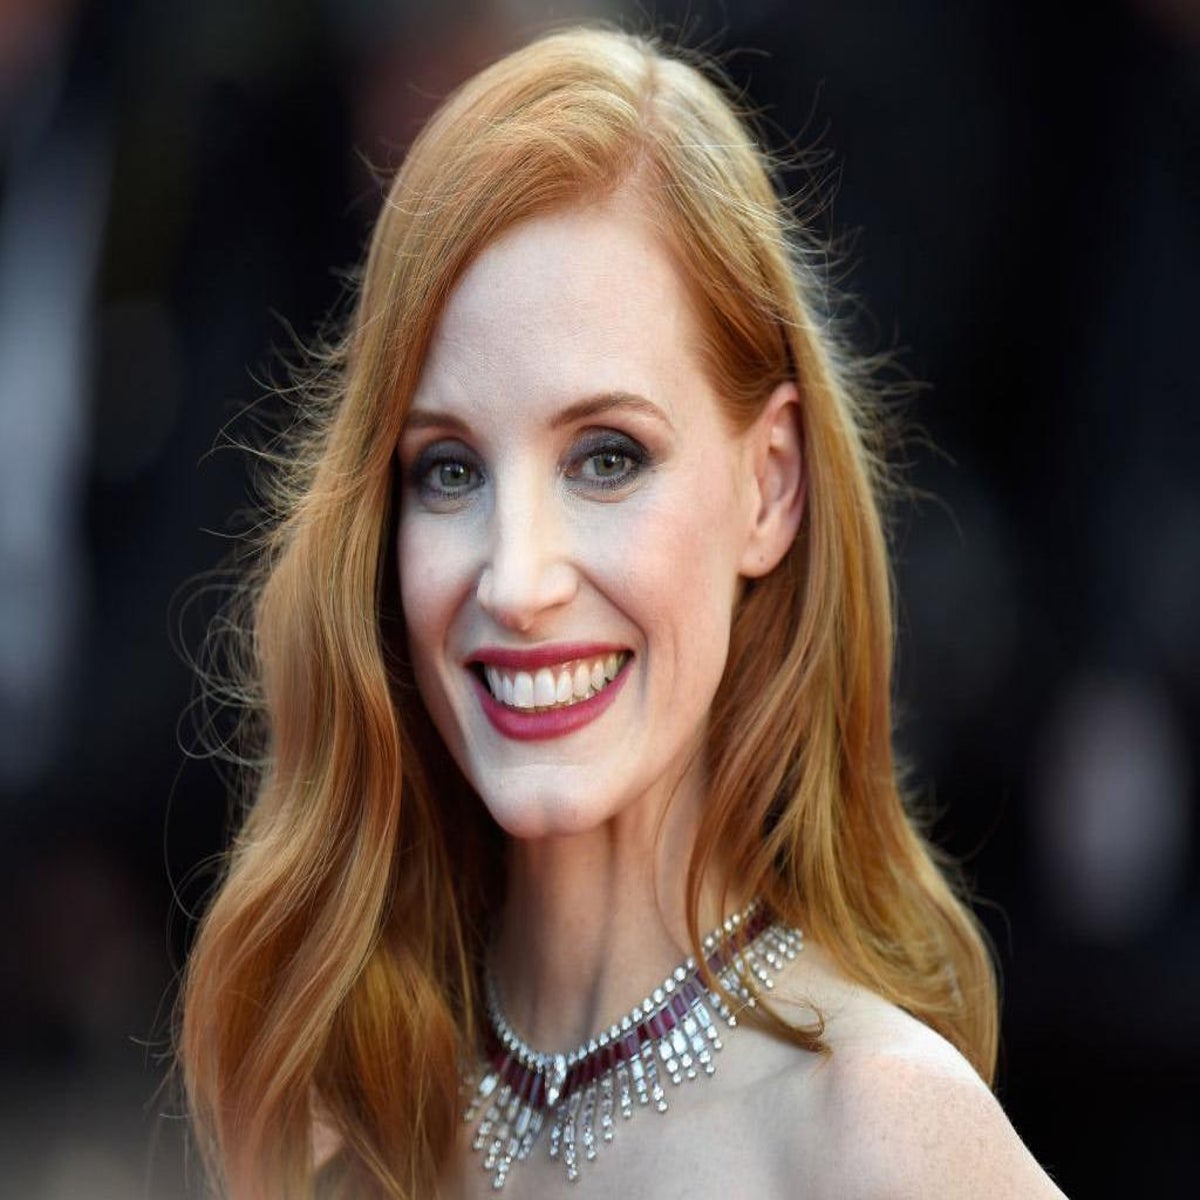 Jessica Chastain: 'I want to play well-written women